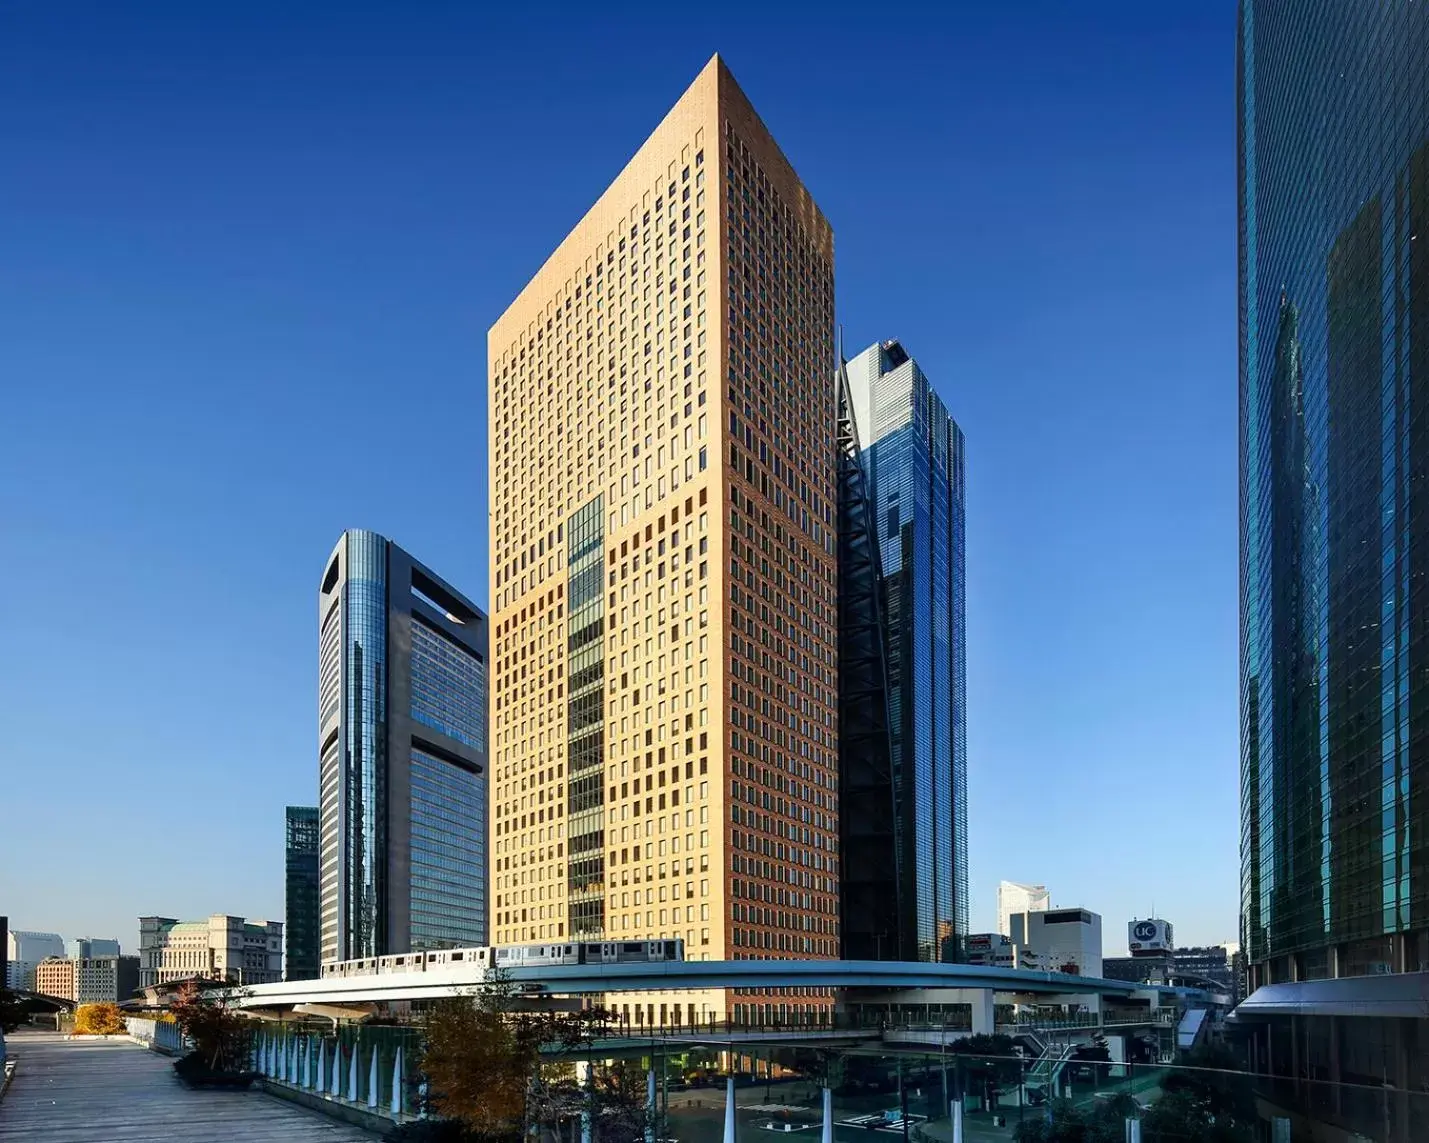 Property Building in Royal Park Hotel The Shiodome, Tokyo